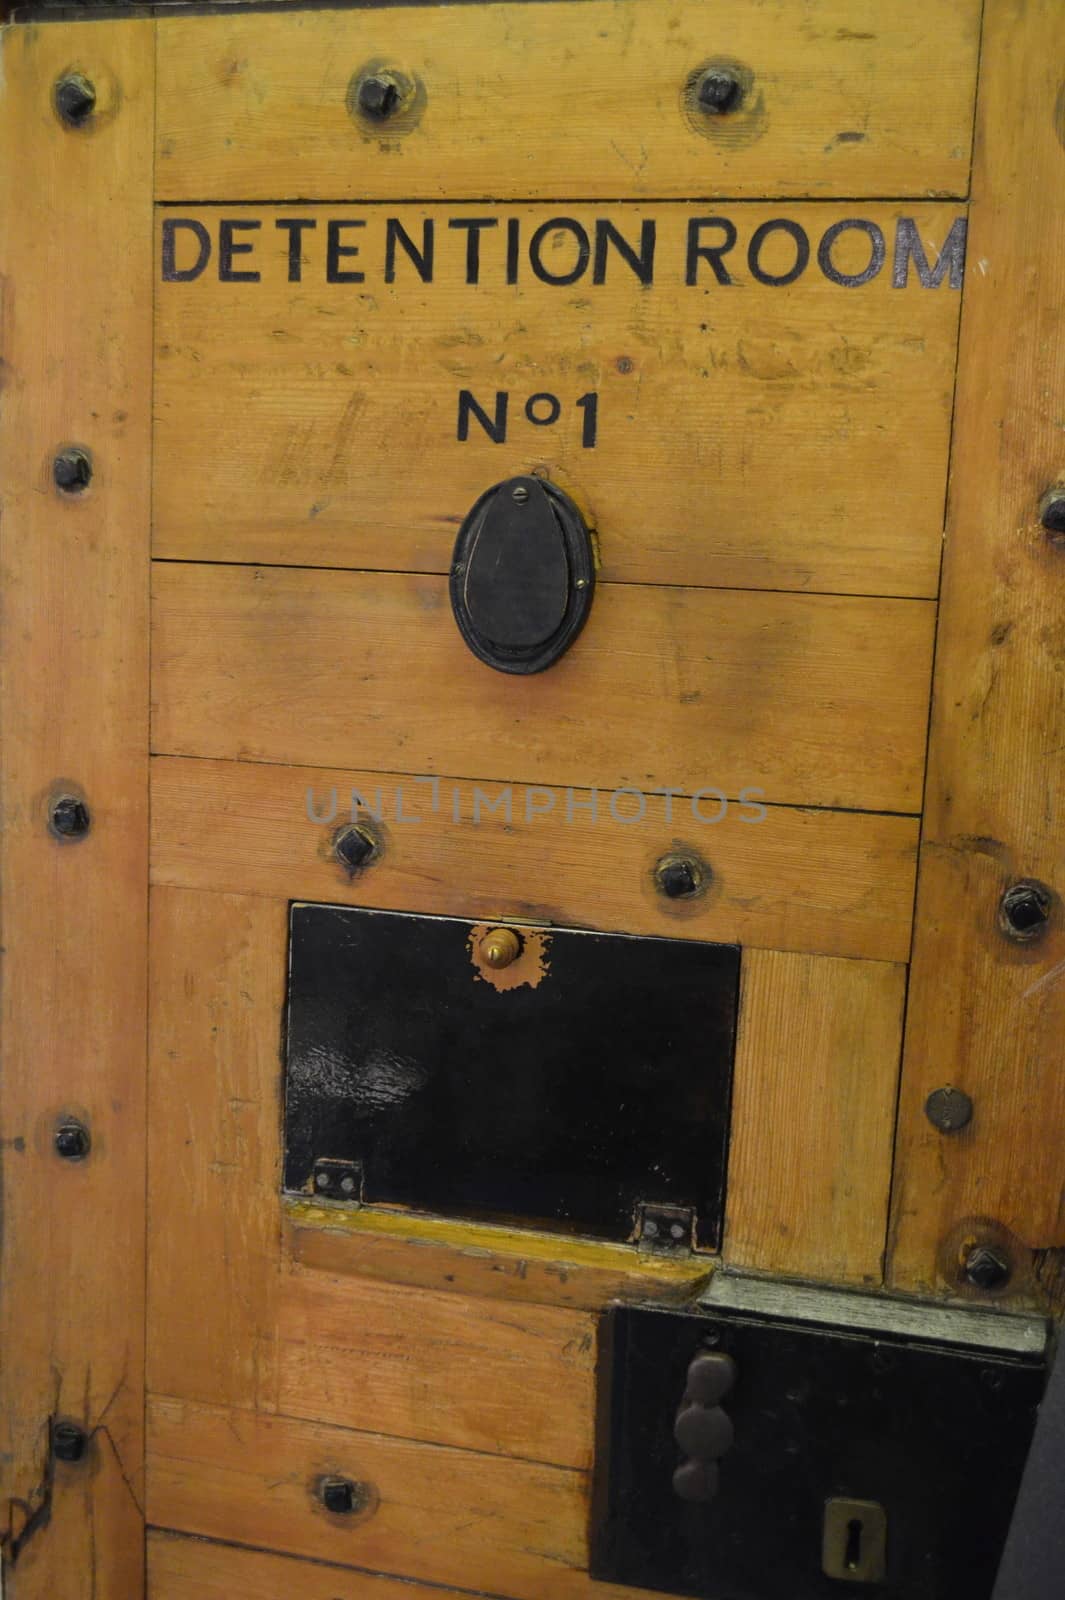 WW2 detention room used to lock up prisoner's in the UK.